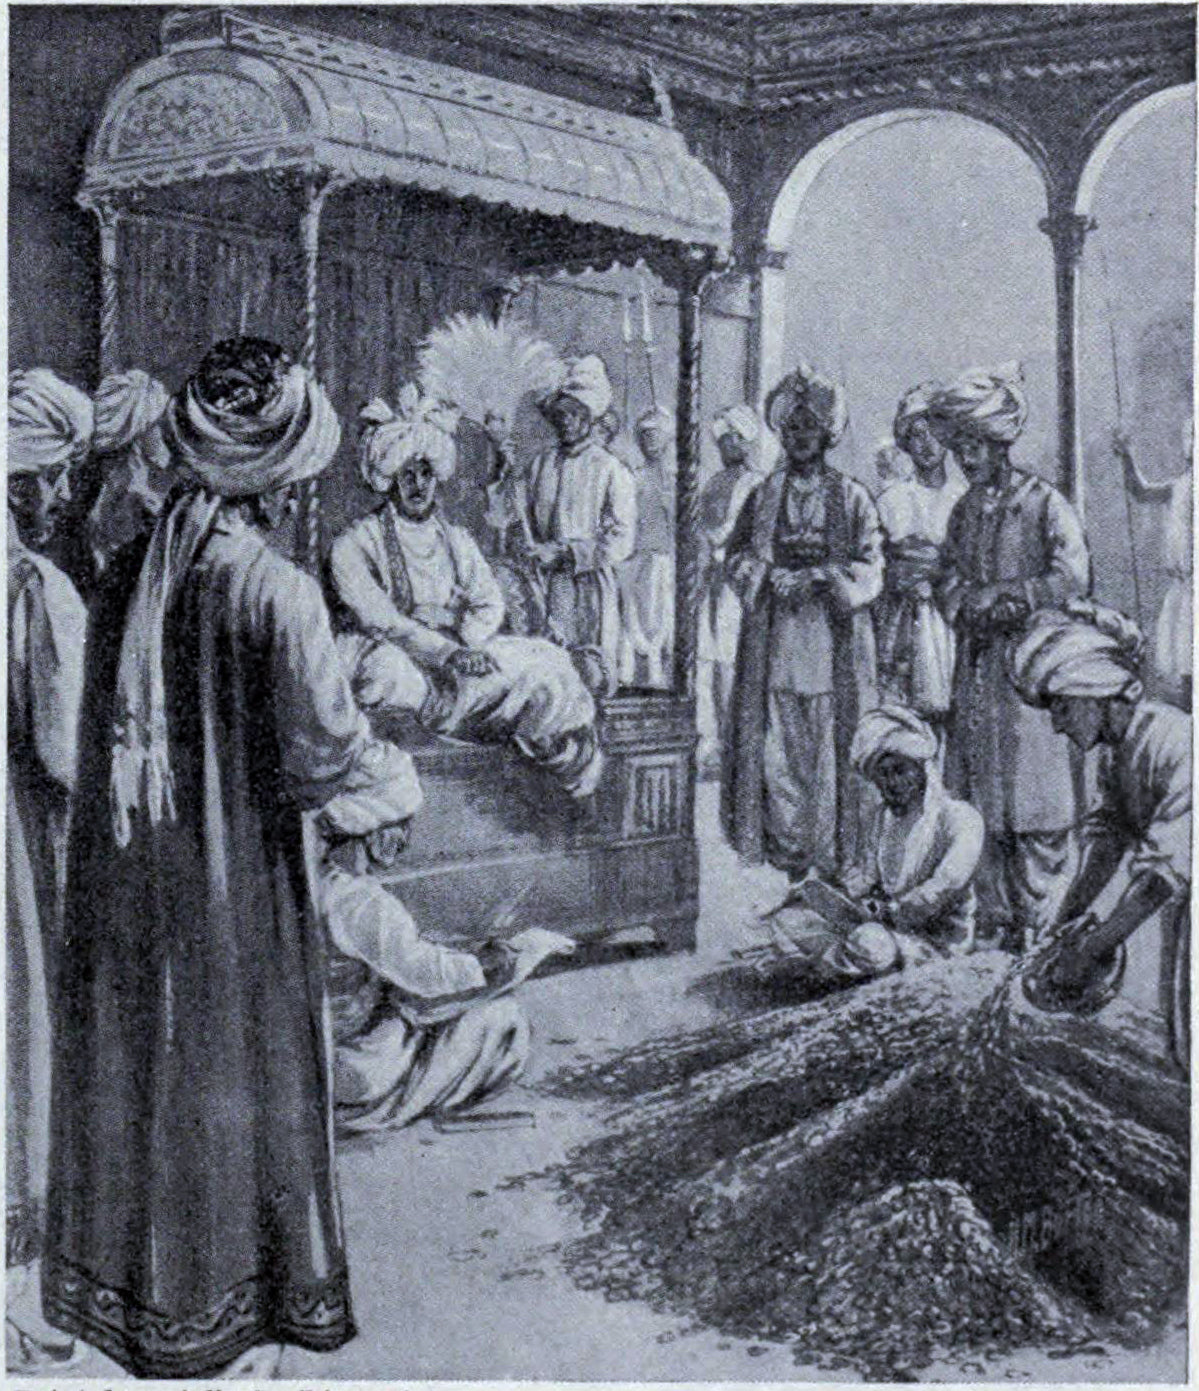 Muhammad Tughlak orders his copper coins to pass for silver, 1330 CE (illustration from Hutchinson's Story of the Nations)